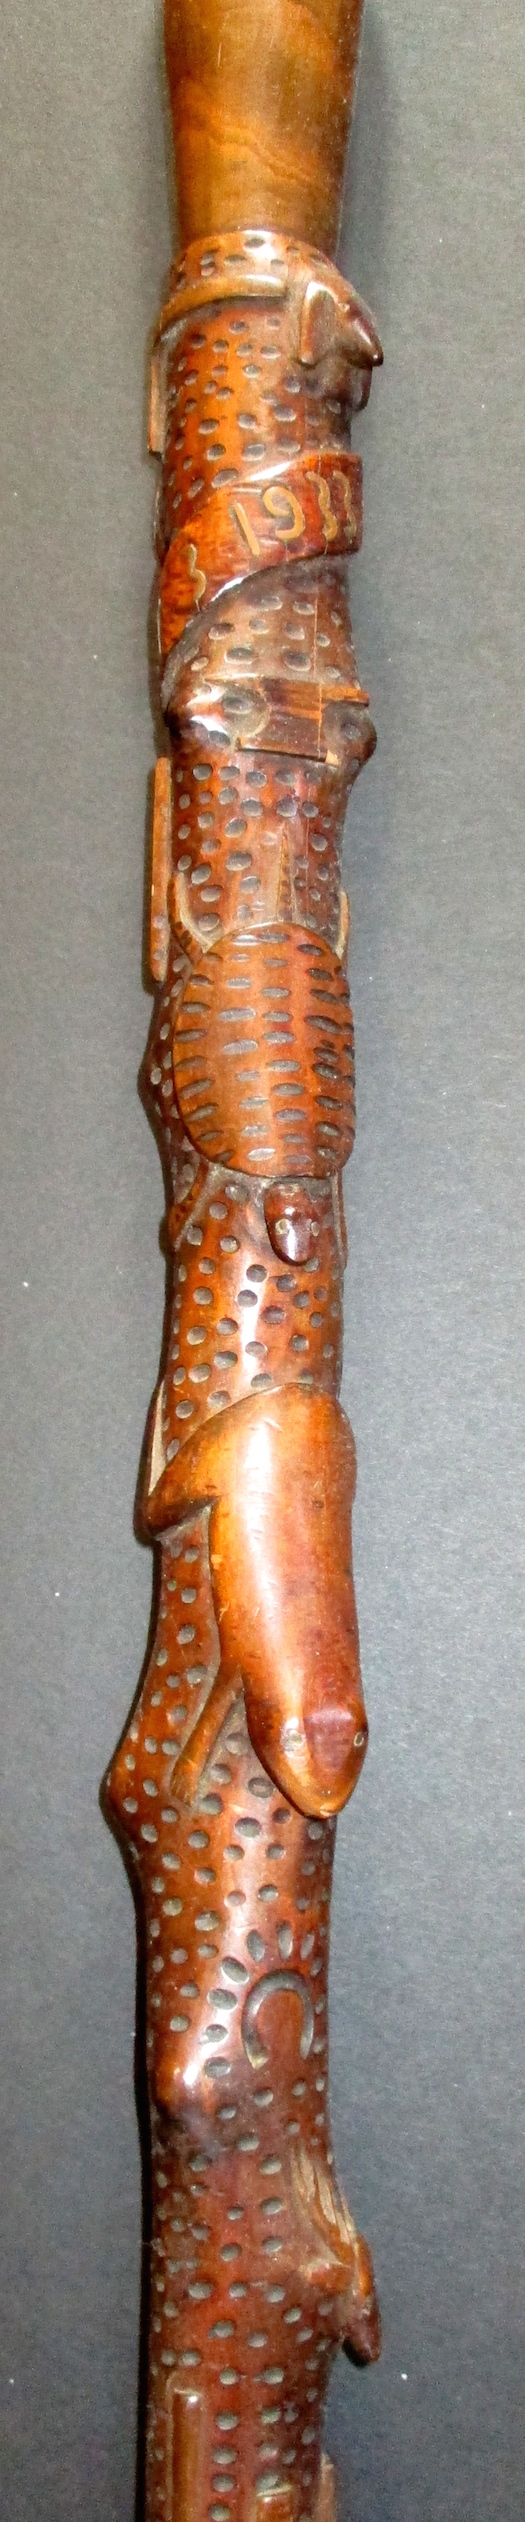 Close-up of Part of the Details of Folk Art Cane